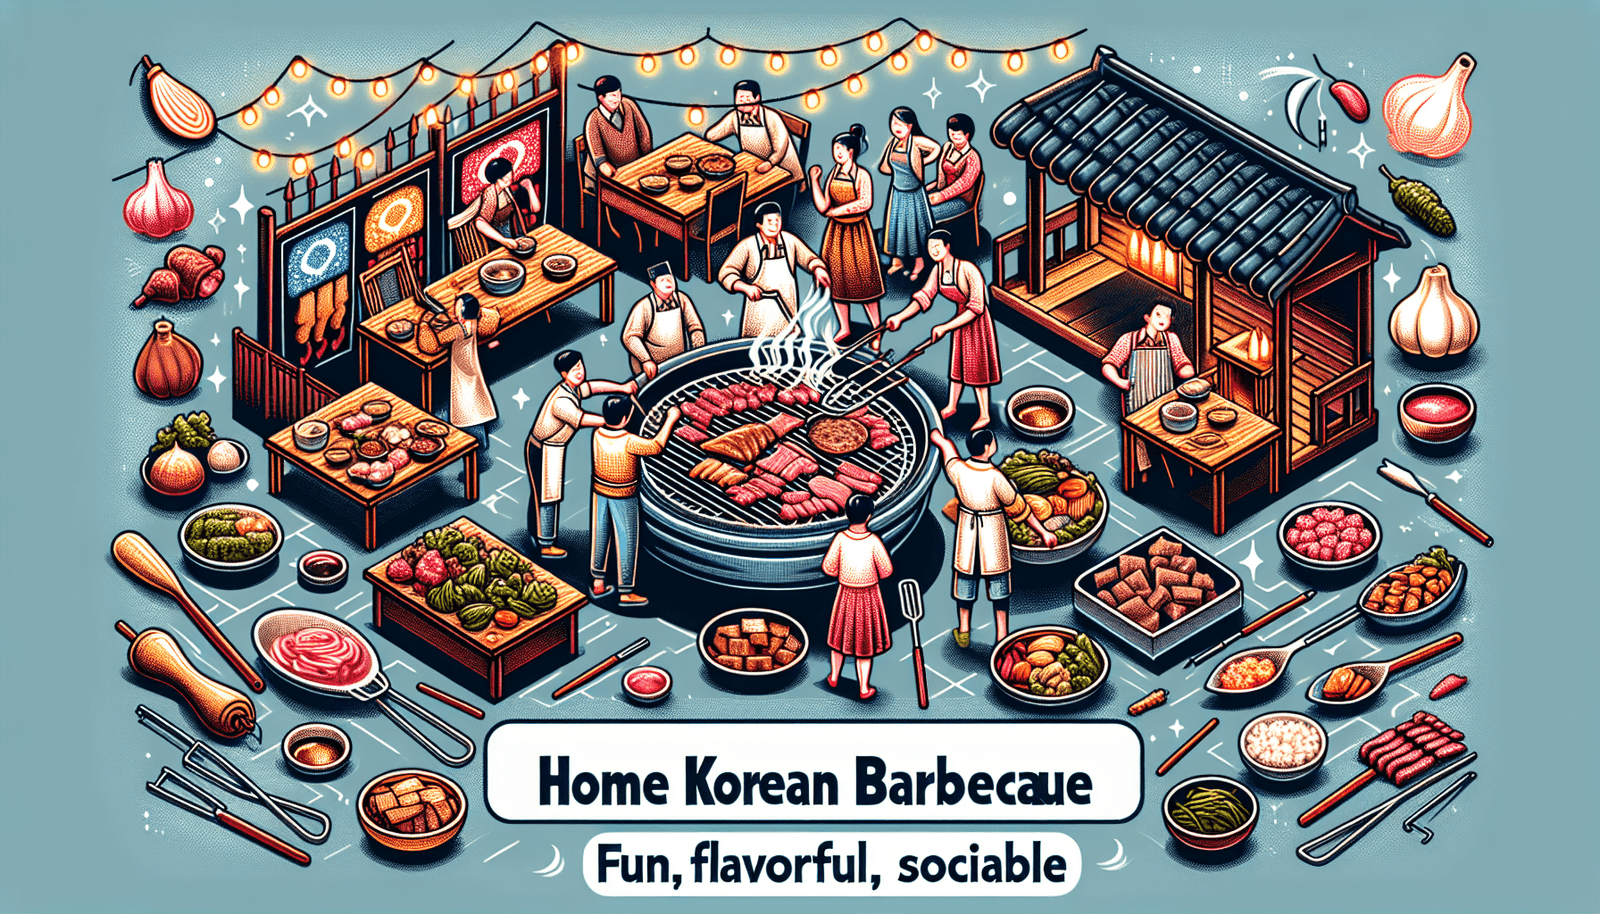 Can You Share Insights Into The Popularity Of Korean Barbecue At Home?